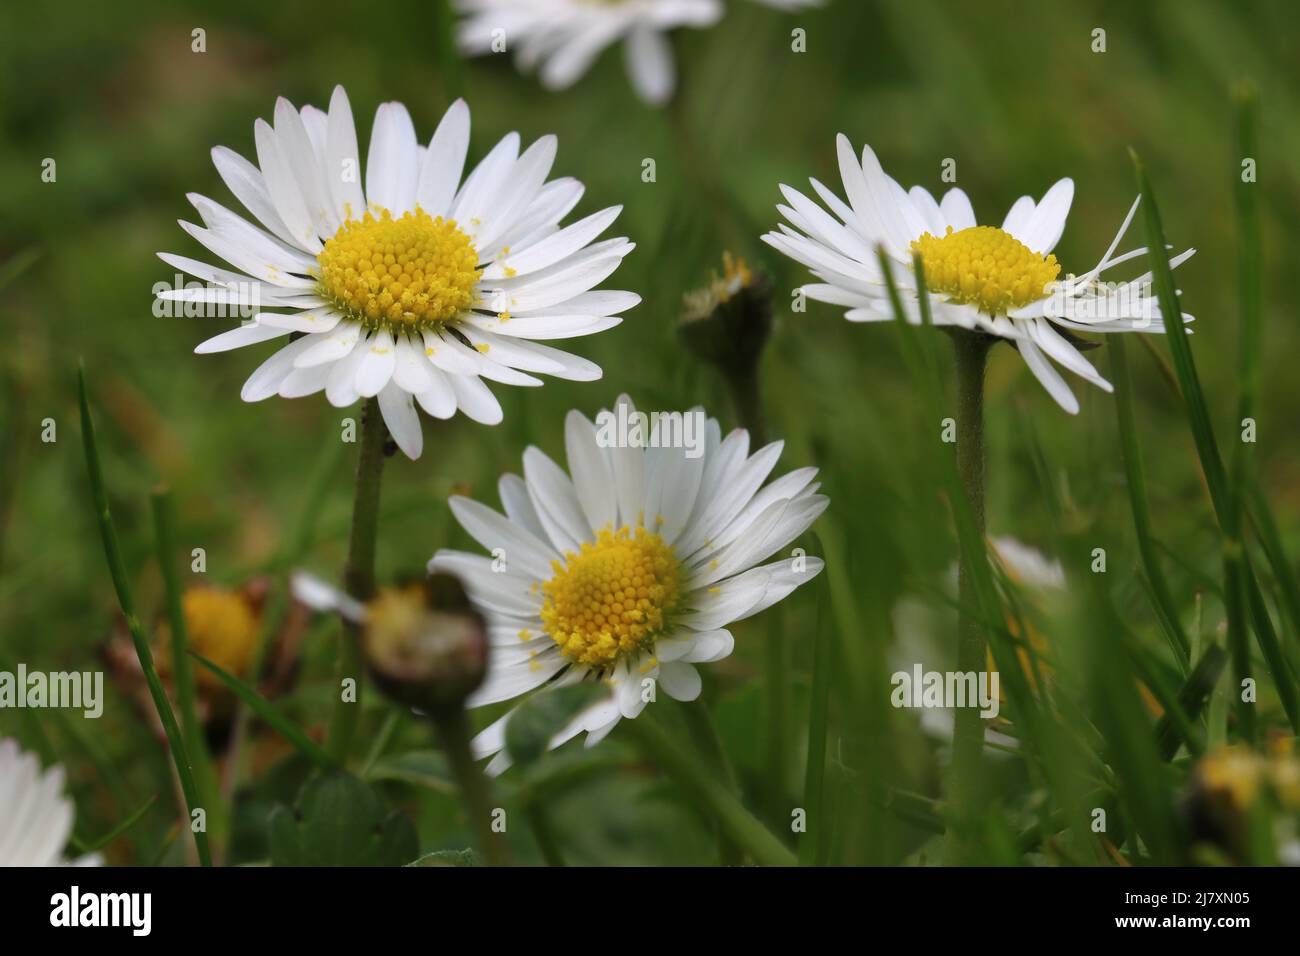 close-up of pretty daisies in a lawn with selective focus Stock Photo